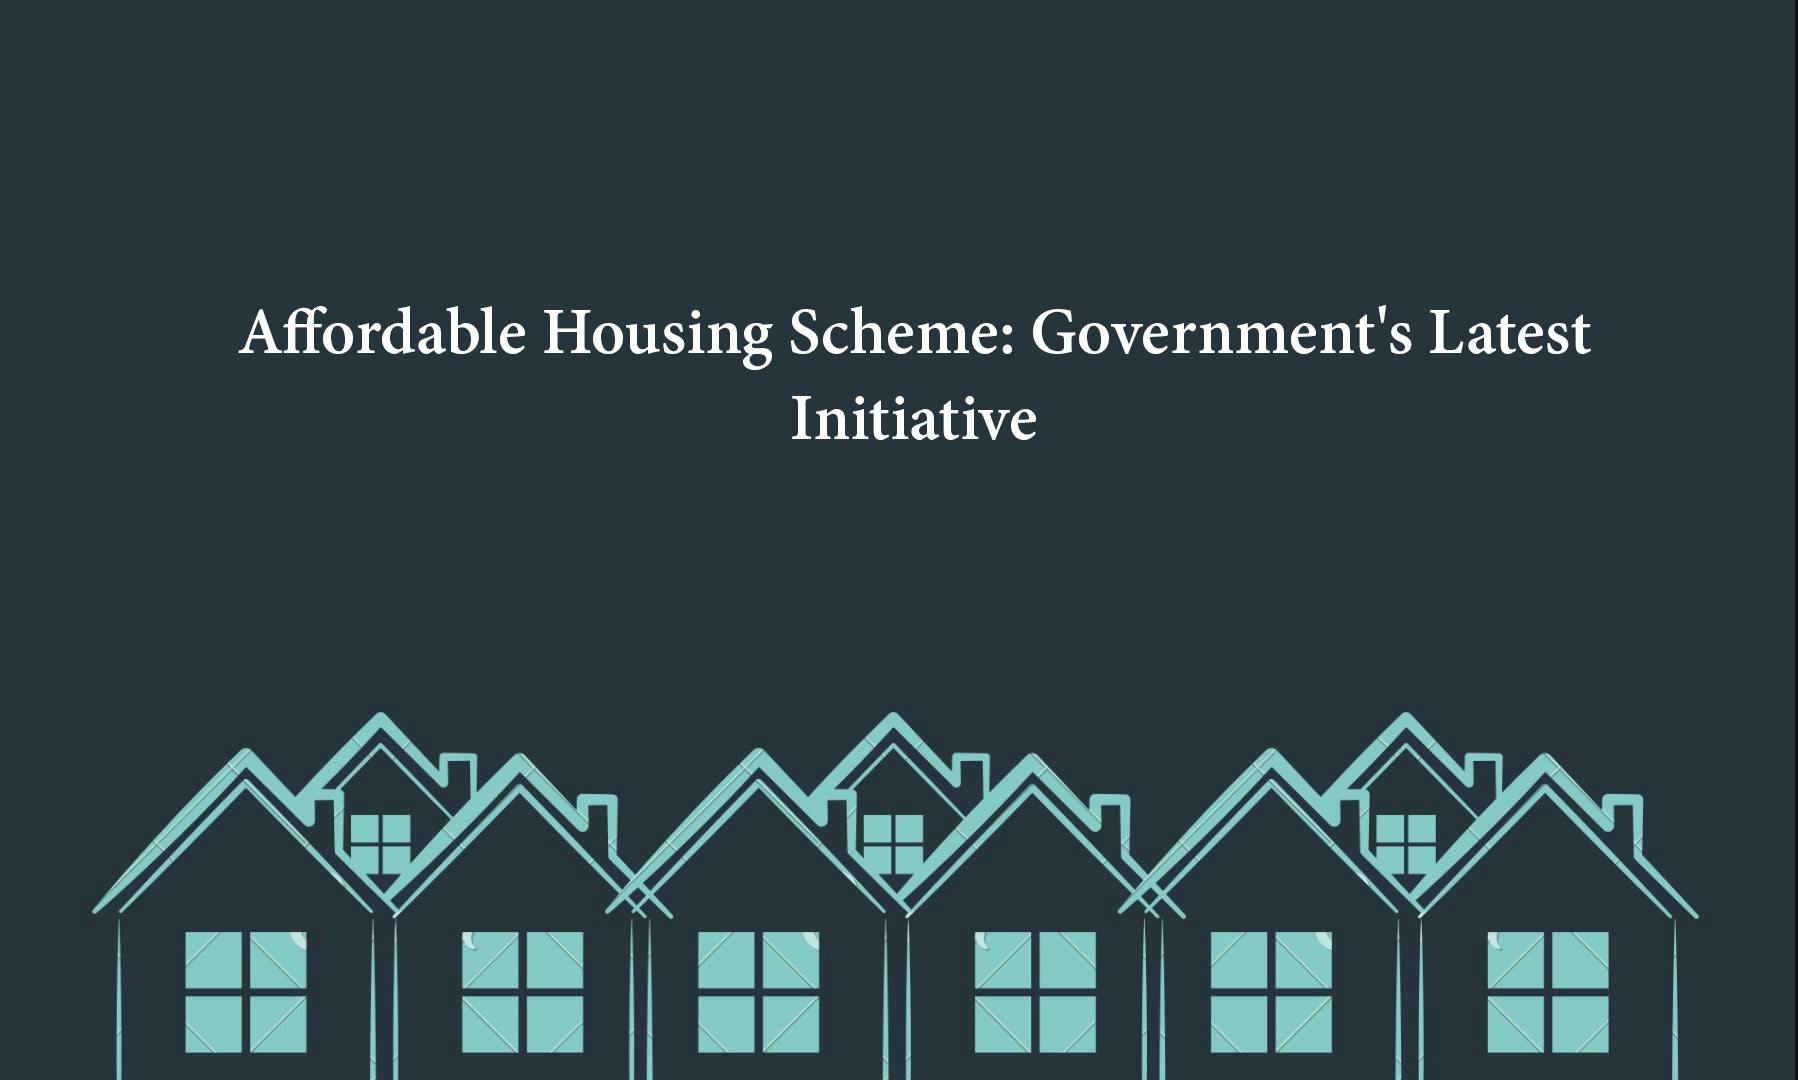 Affordable Housing Scheme: Government's Latest Initiative